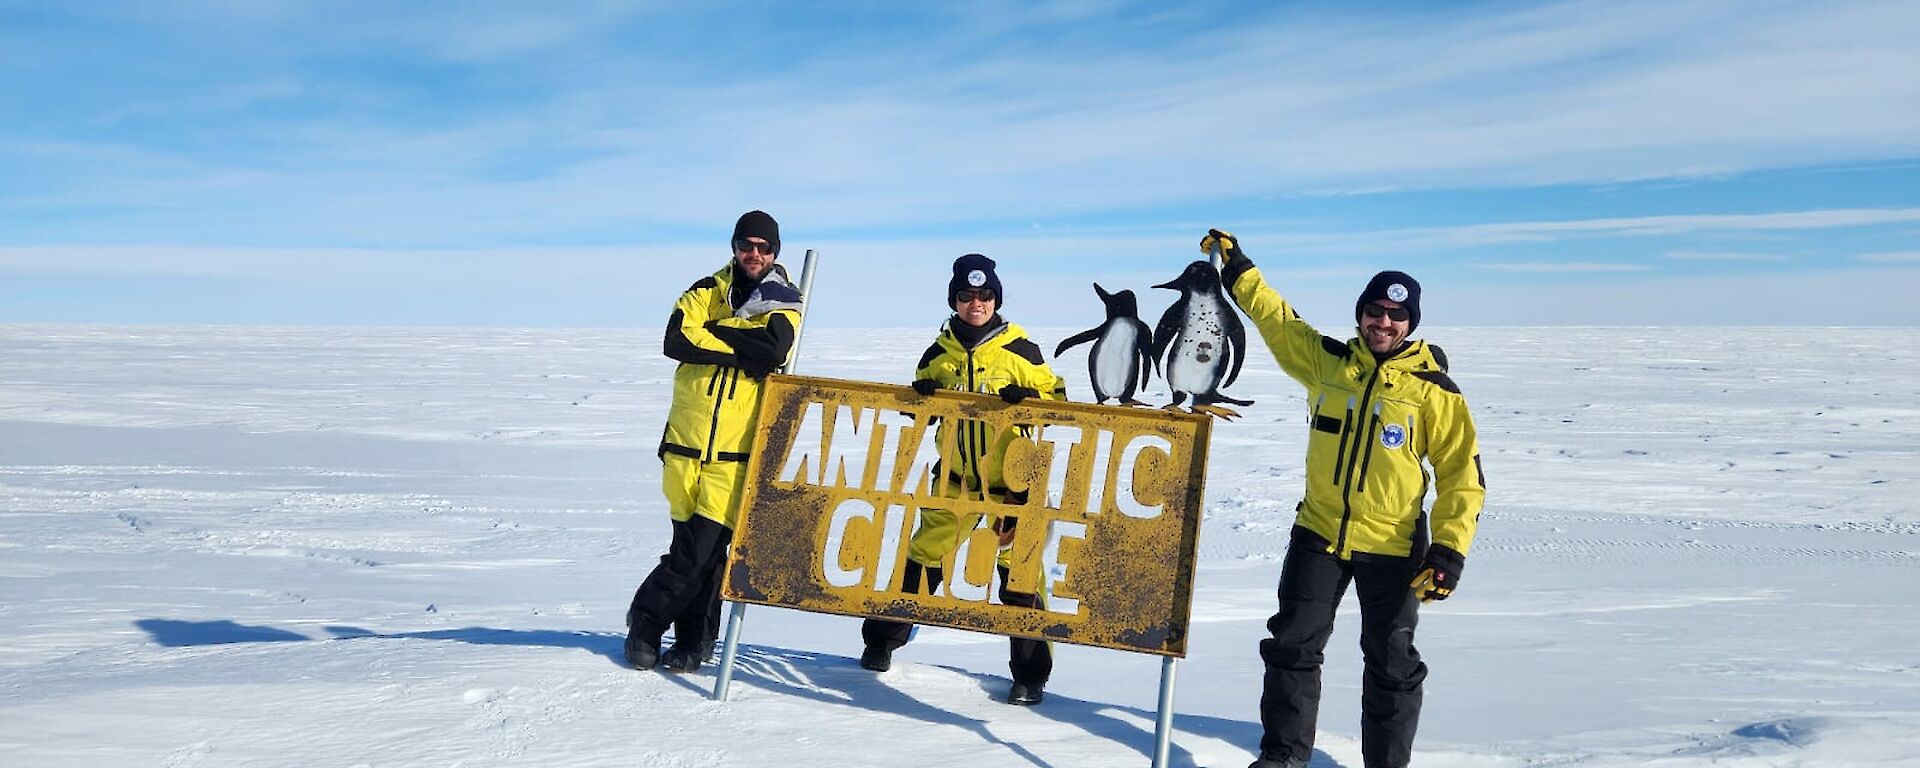 Three expeditioners standing on snow at the Antarctic Circle sign